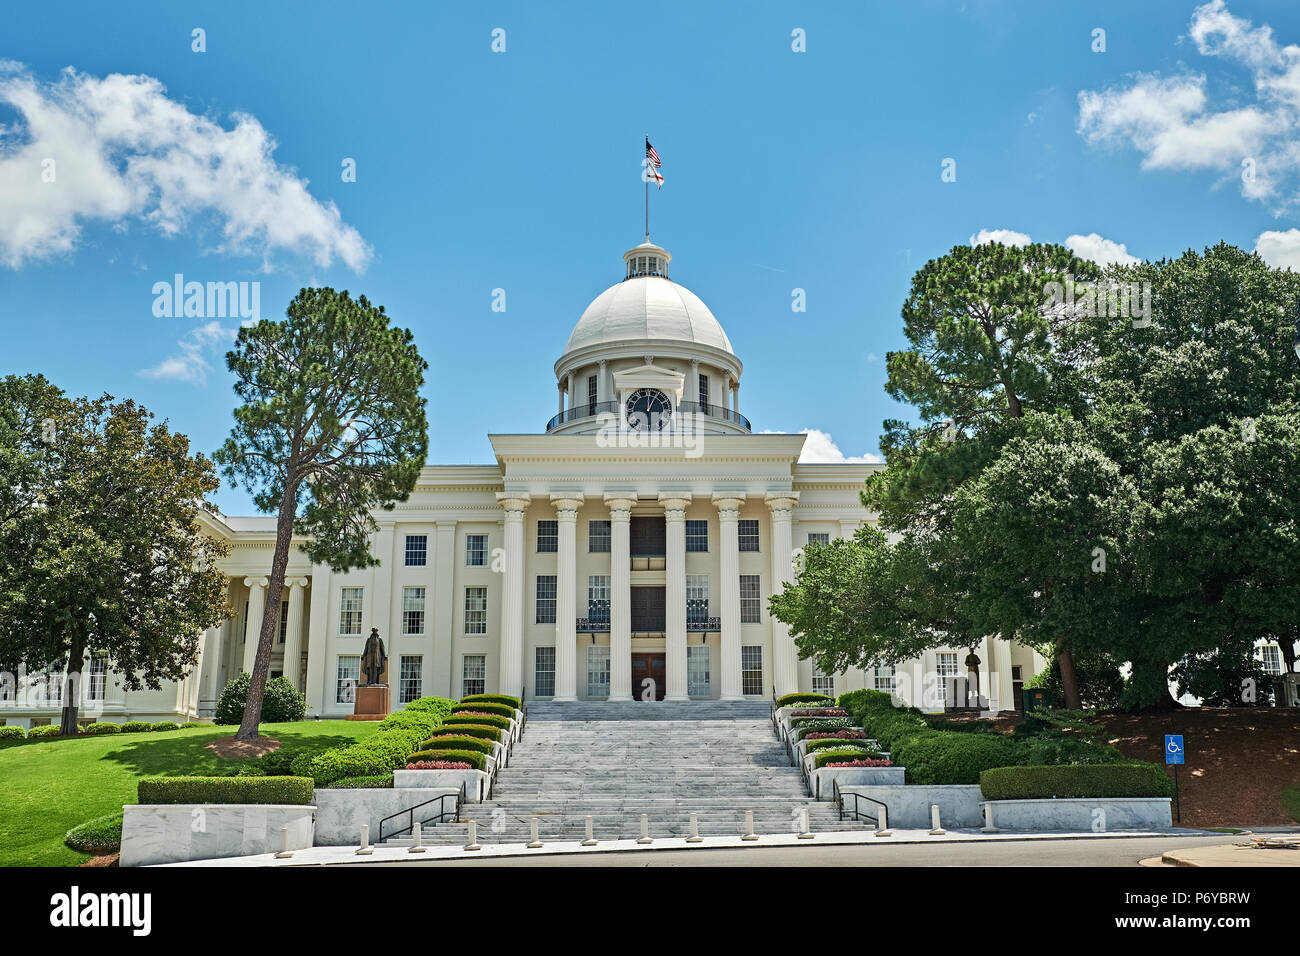 The Alabama State Capitol building in Montgomery Alabama is the seat of Alabama state government in Alabama USA. Stock Photo